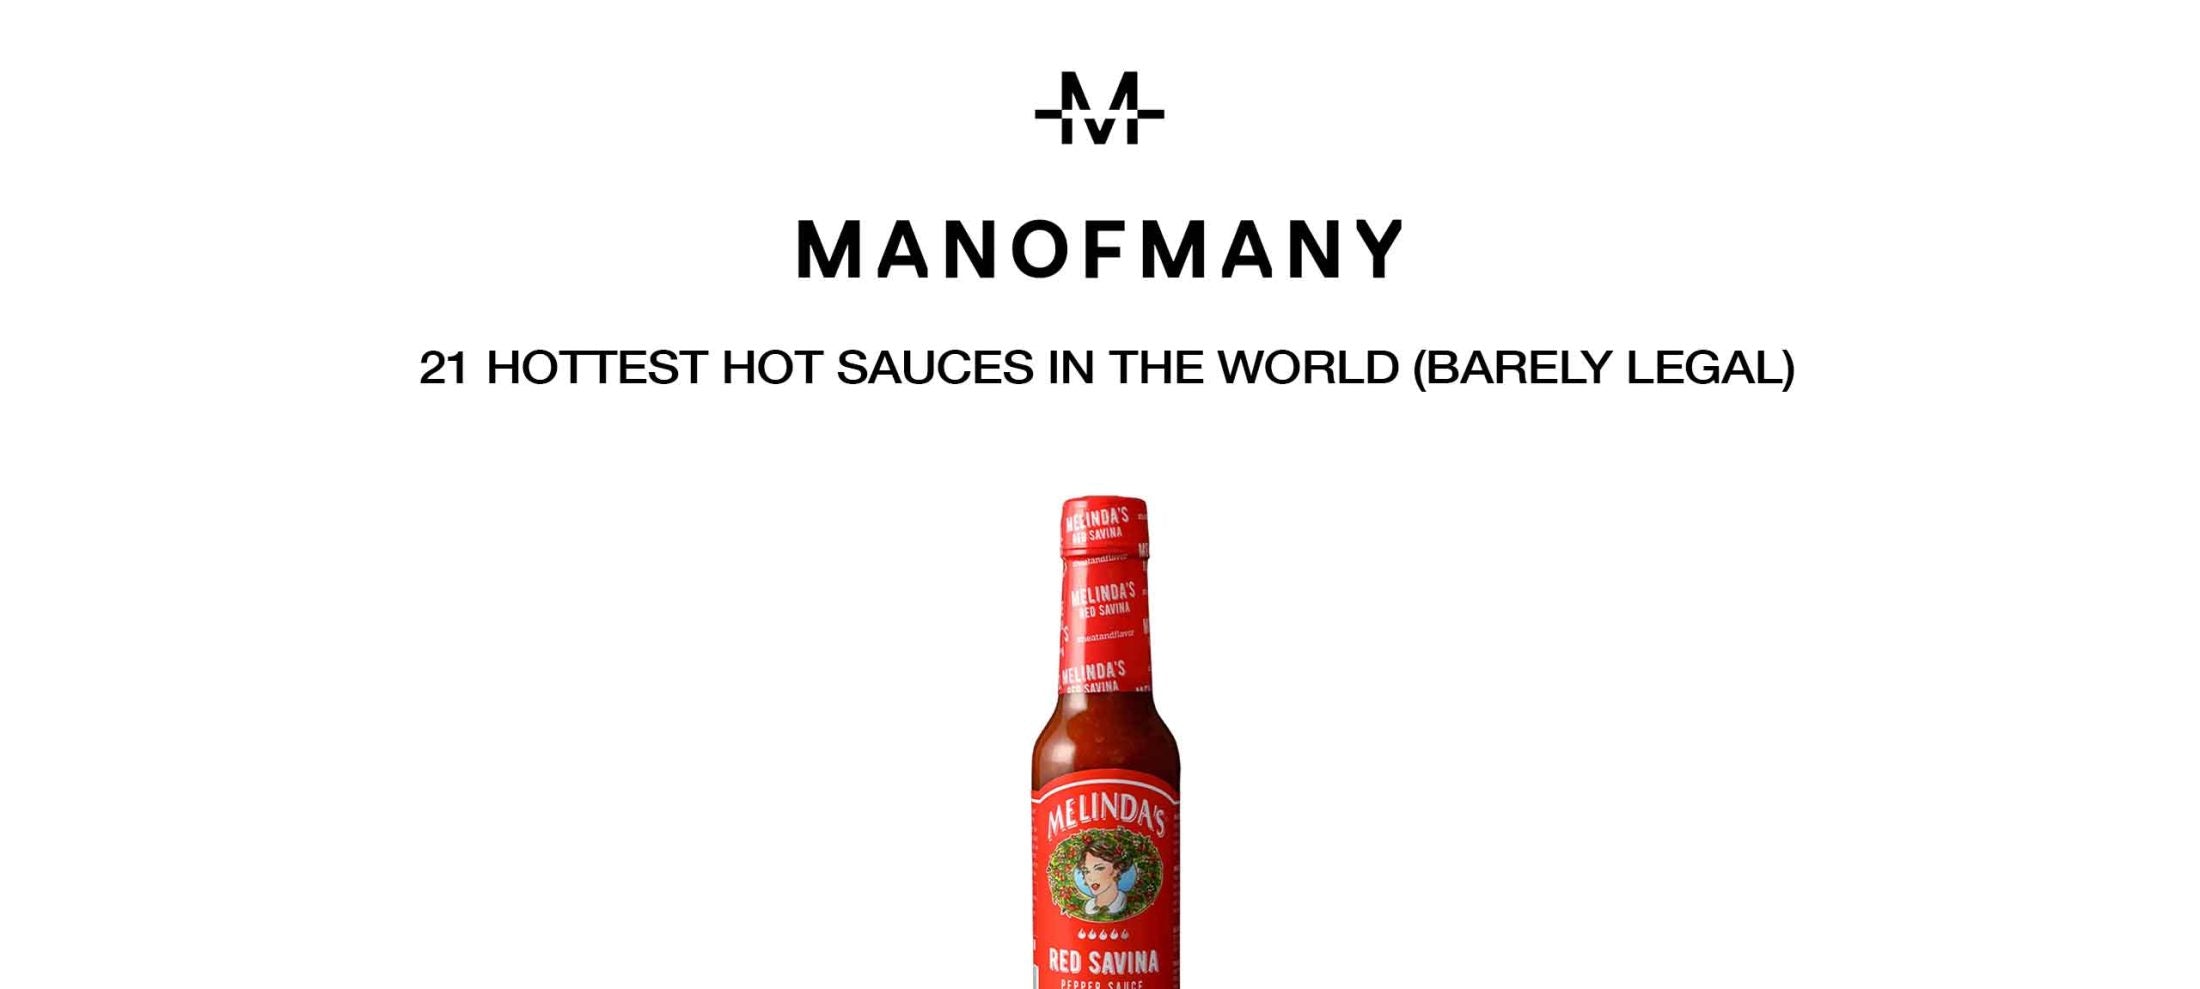 21 Hottest Hot Sauces in the World (Barely Legal) | Says MANOFMANY